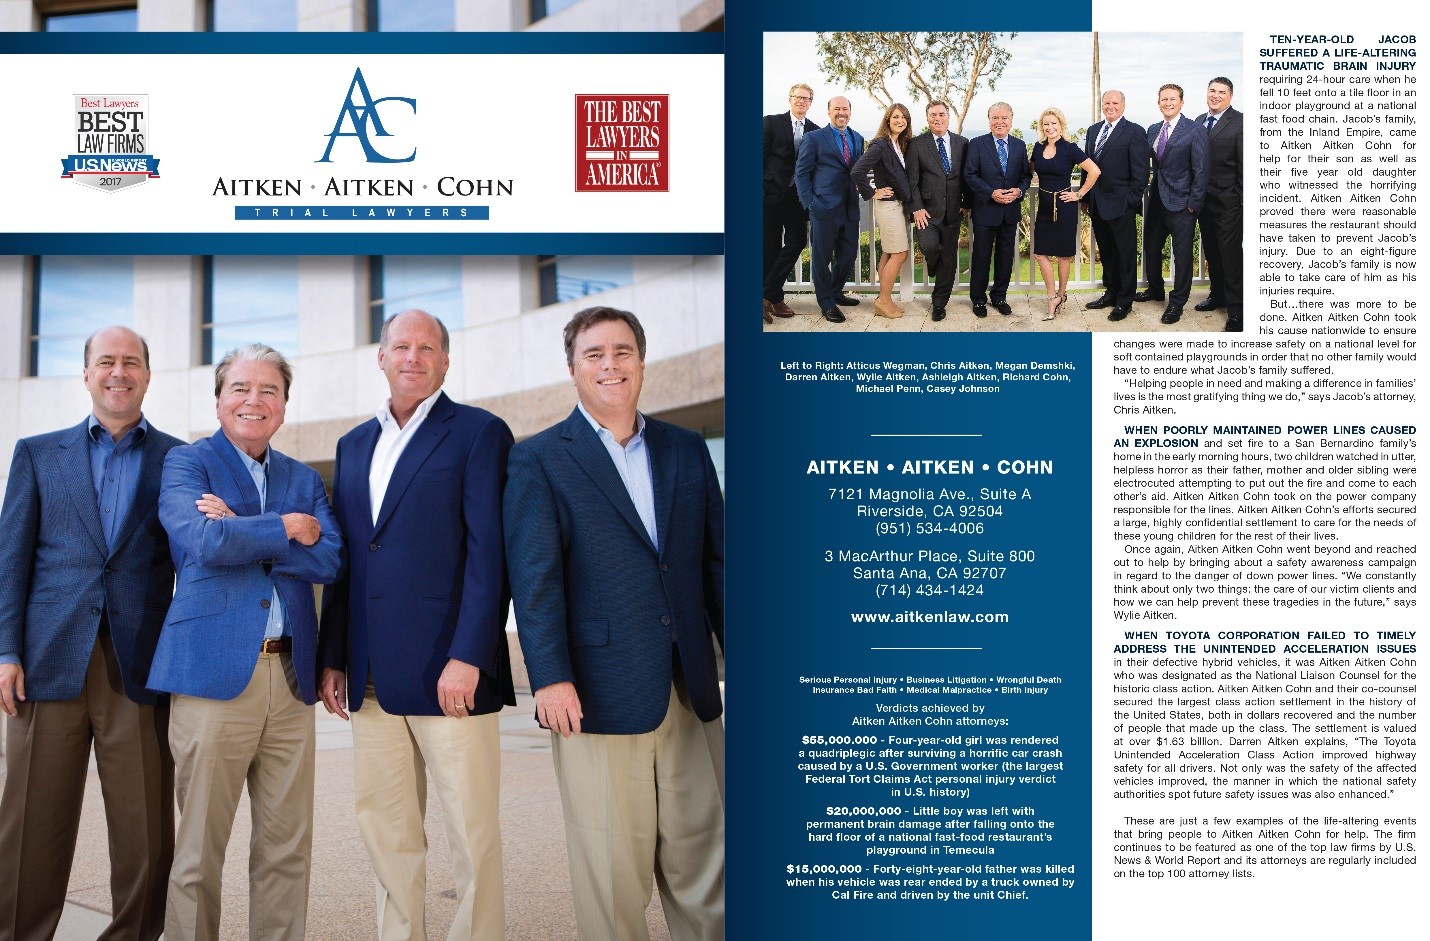 Aitken Aitken Cohn Attorneys Named Top Lawyers in the Inland Empire by Inland Empire Magazine Second Year in a Row